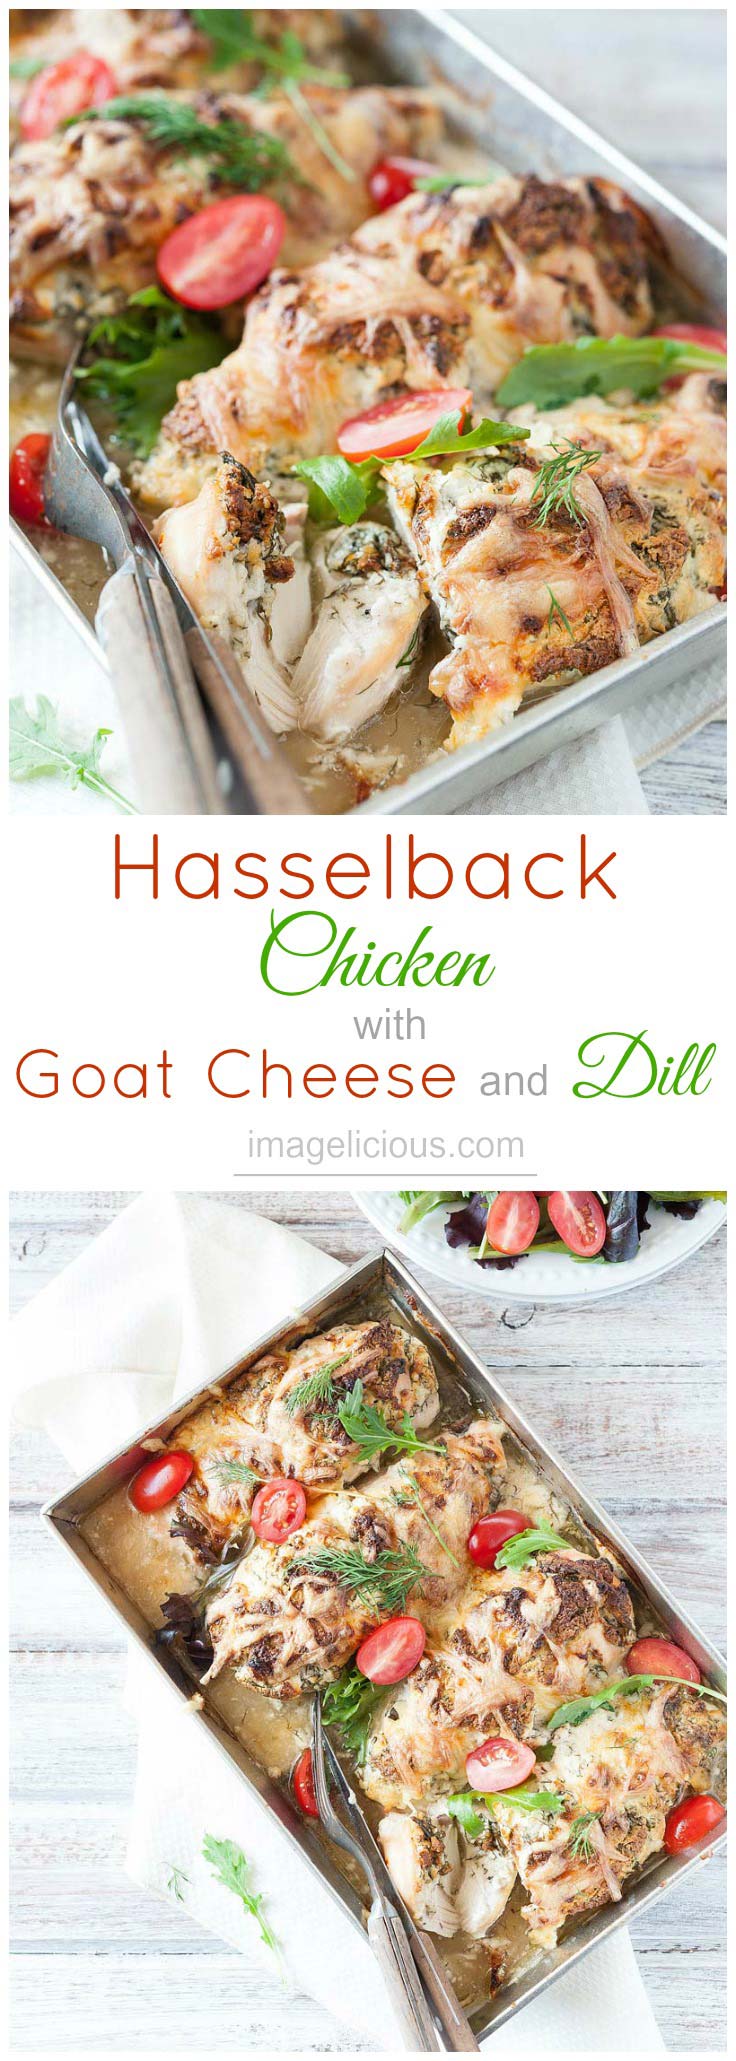 Hasselback Chicken with Goat Cheese and Dill is an easy and delicious way to cook chicken breast. It's perfect for a weeknight meal or a fancy dinner. Serve with salad, rice or even pasta with light cream sauce | Imagelicious